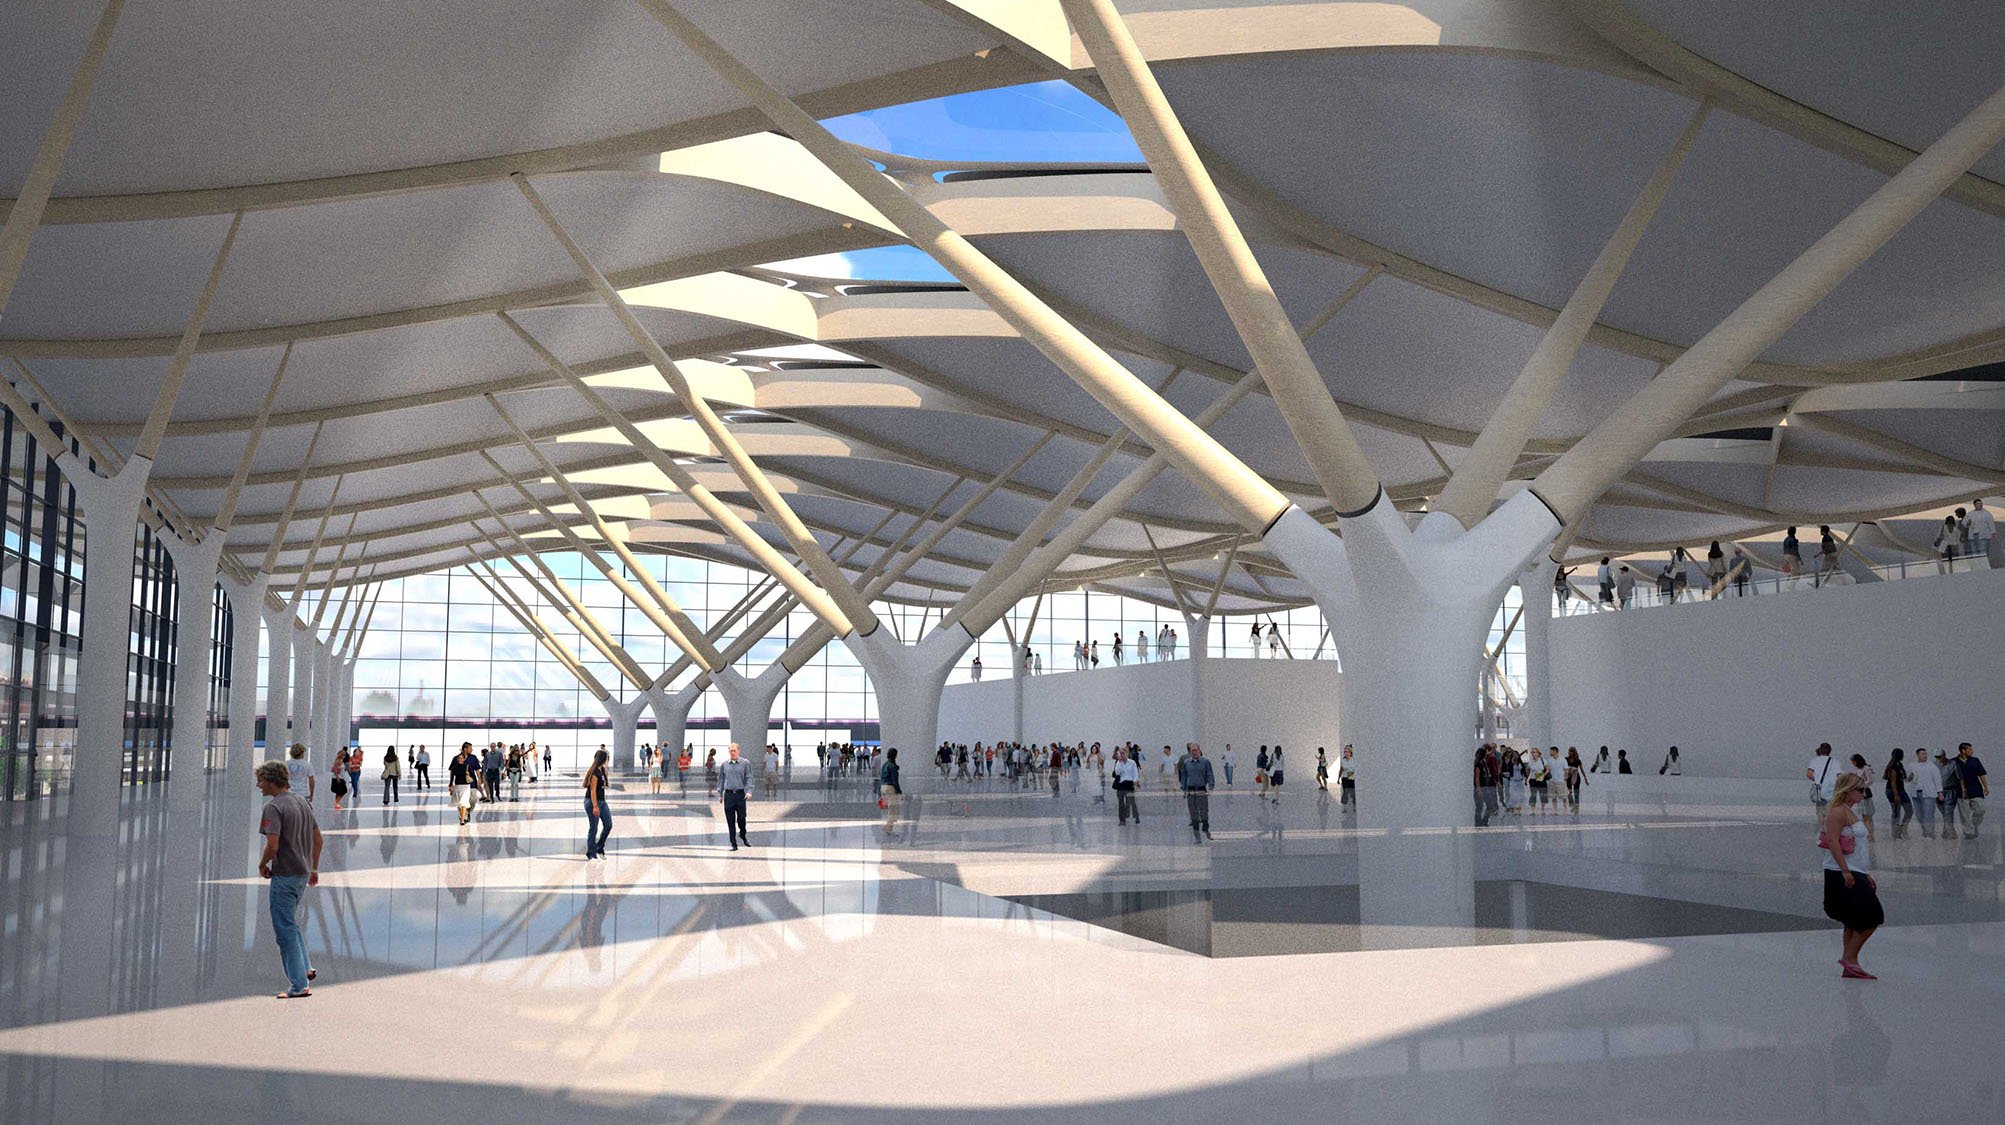 Interior view of Marcopolo Airport. Credit: Arup.